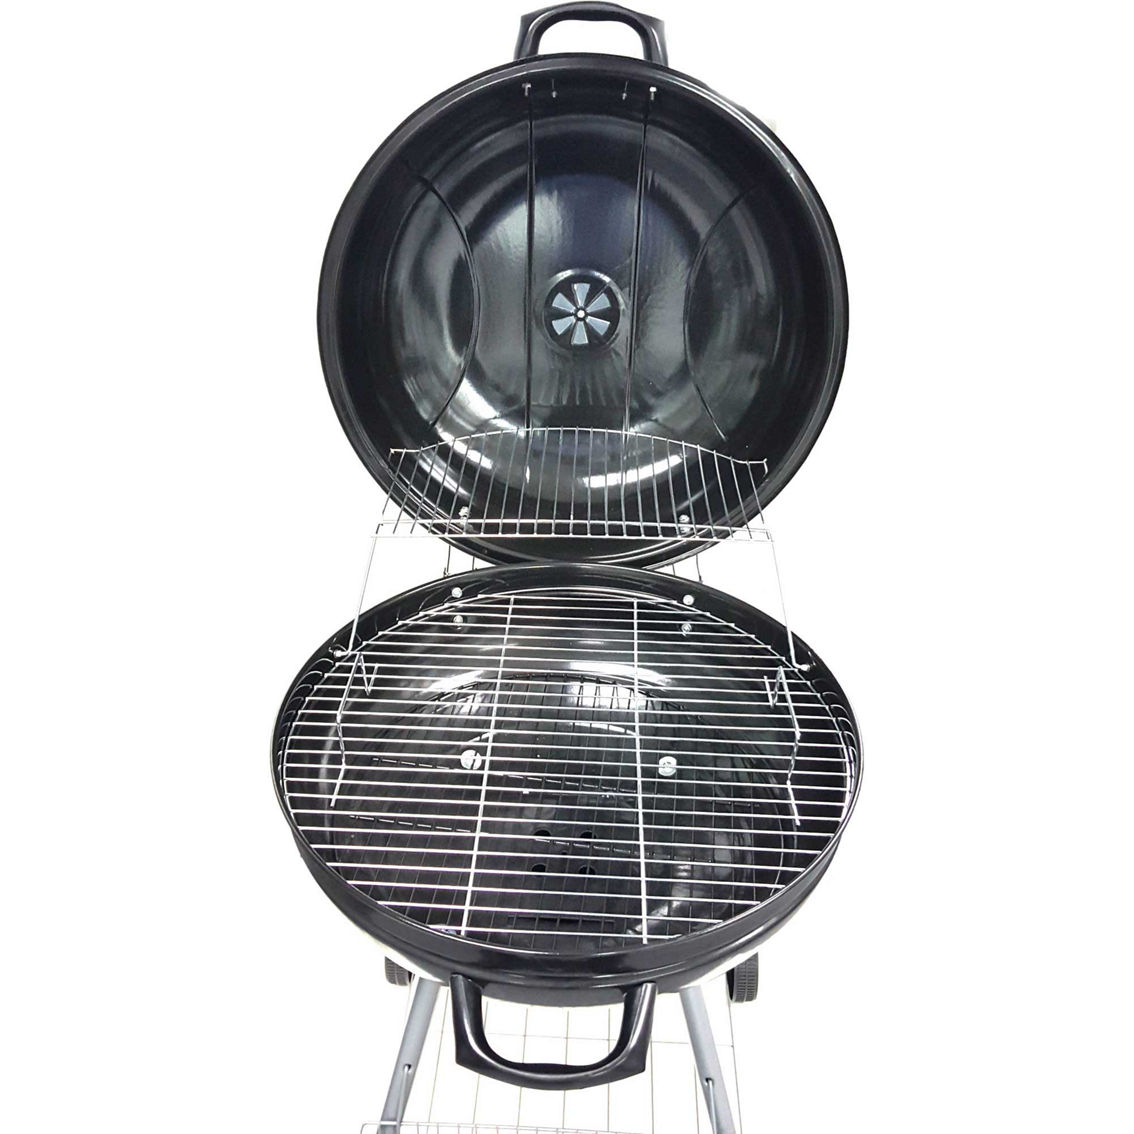 GrillSmith Pioneer 22.5 in. Charcoal Grill with Hinged Lid - Image 5 of 6